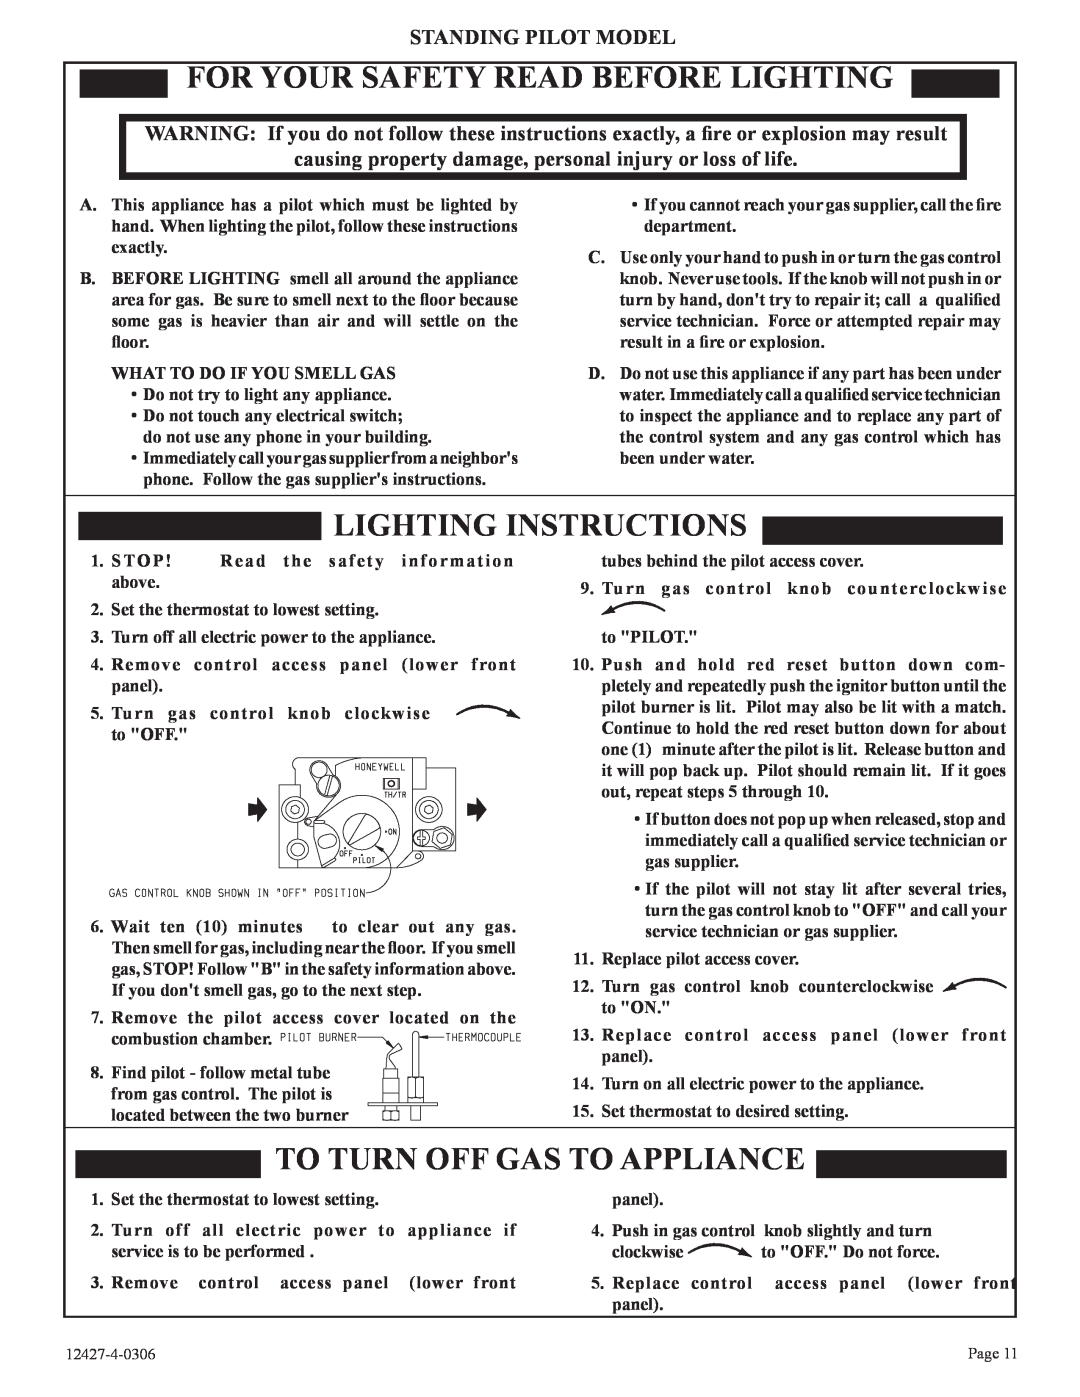 Empire Products FAW-40-1SPP For Your Safety Read Before Lighting, Lighting Instructions, To Turn Off Gas To Appliance 